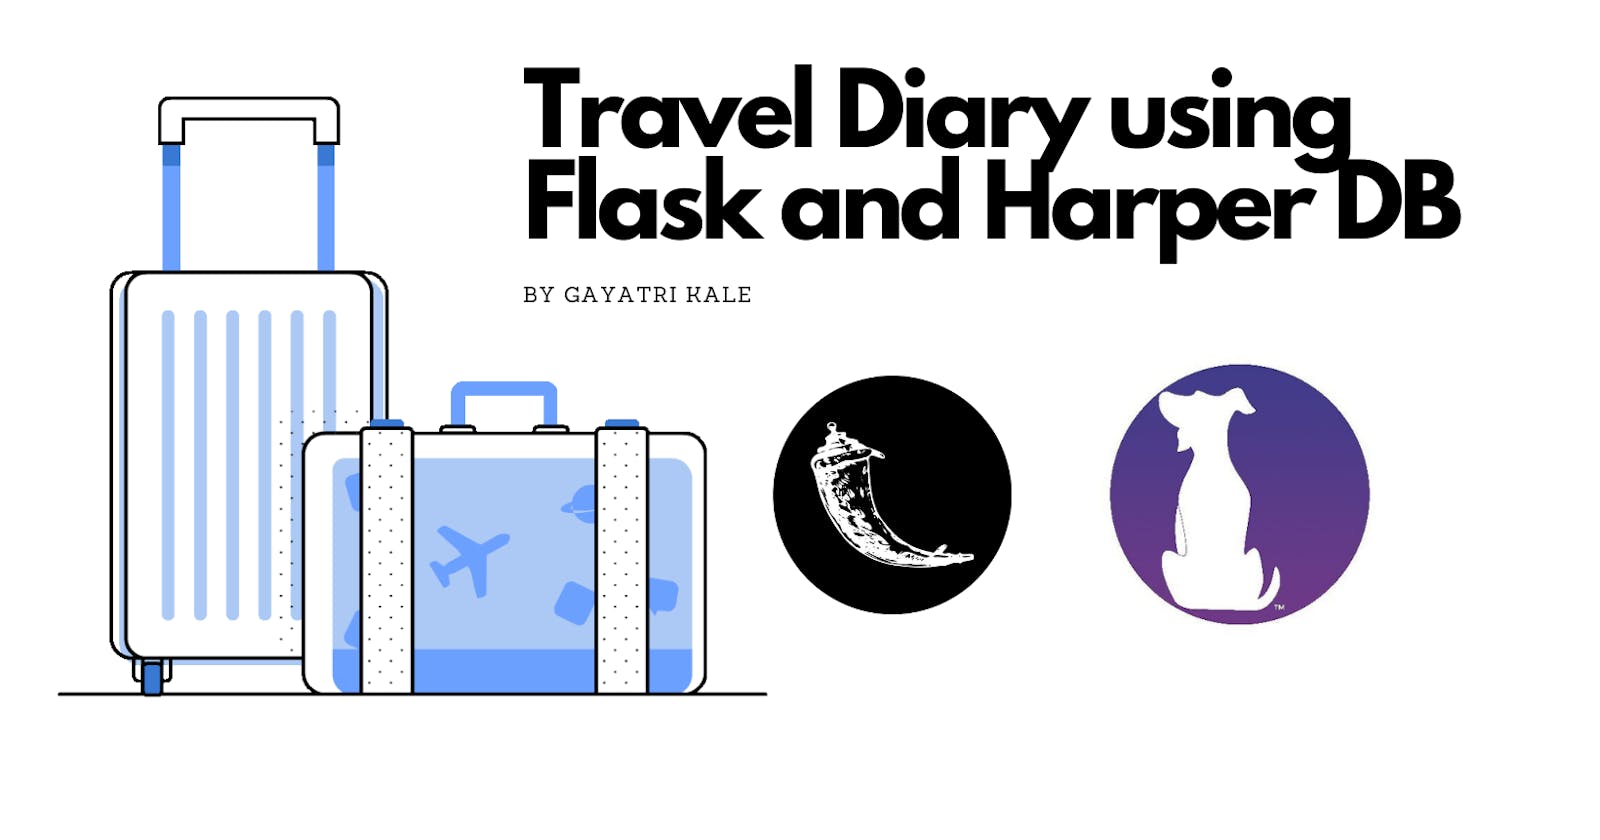 How I created travel diary using flask and harper DB